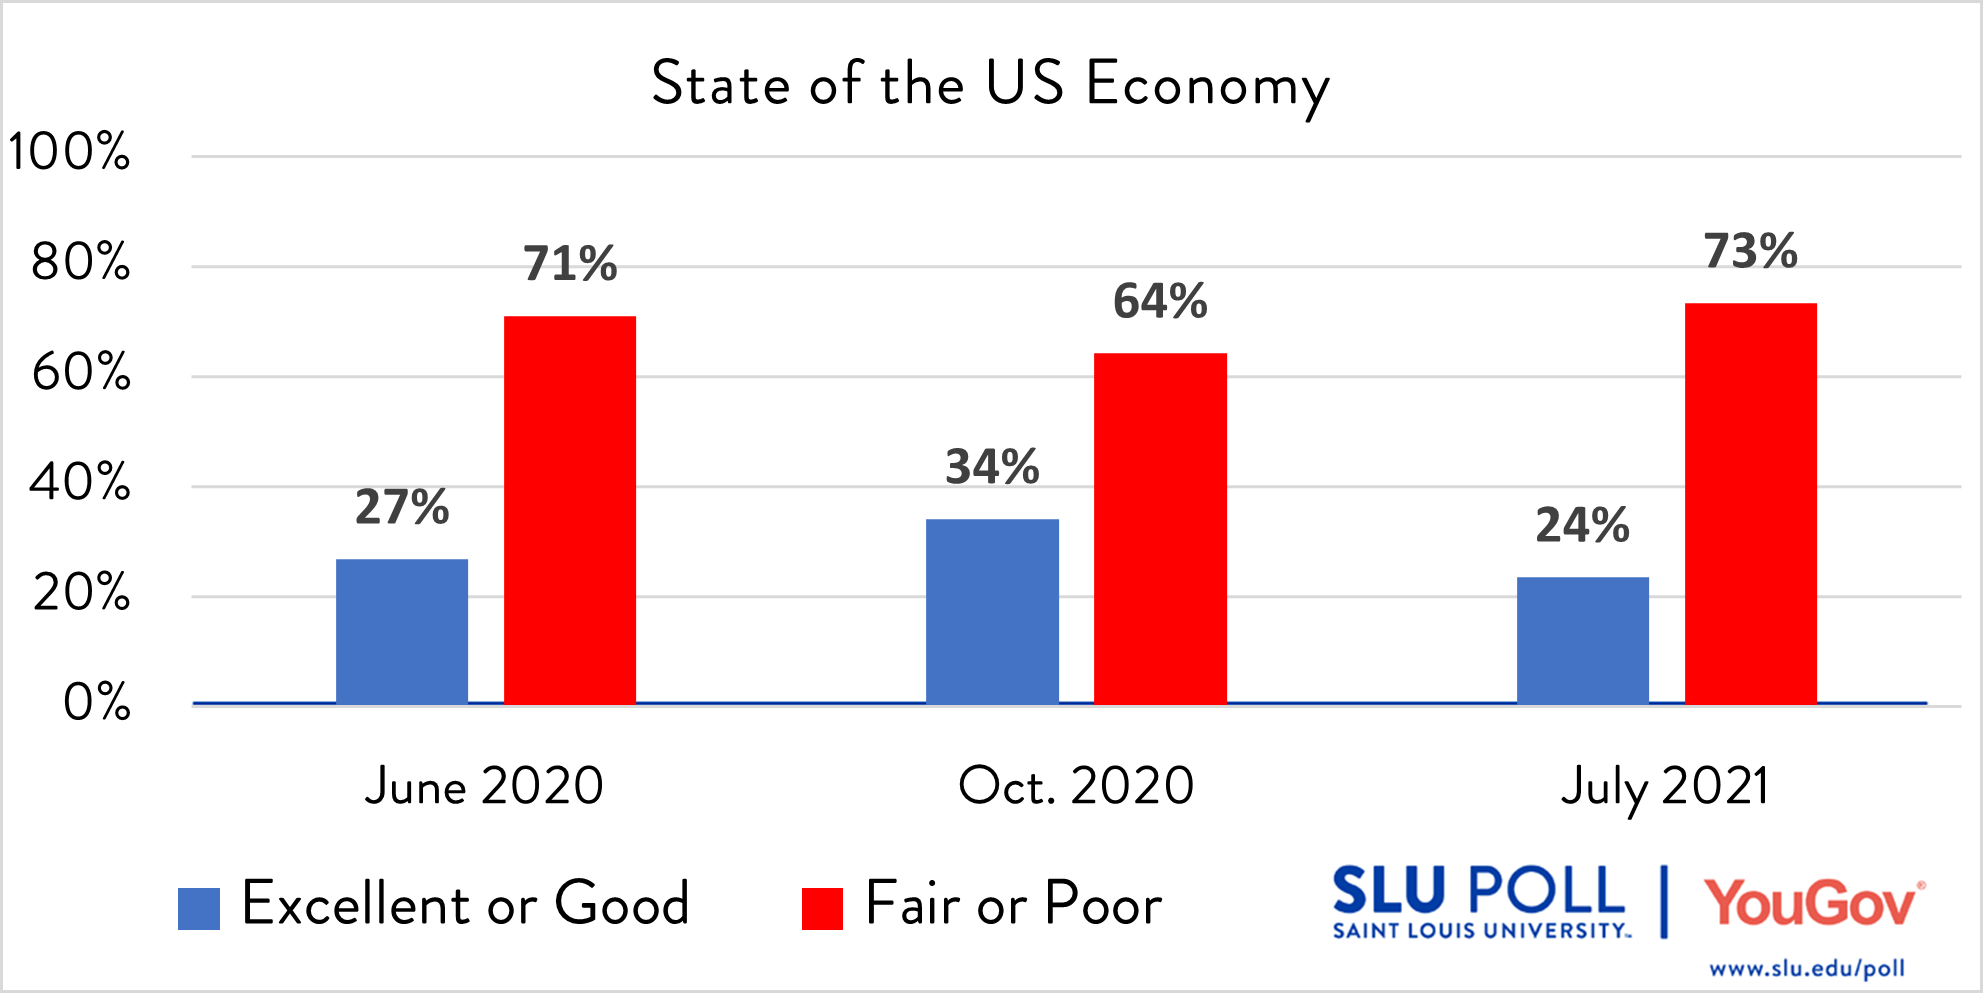 How would you rate the following…The Economy in the United States?  - Excellent: 2% - Good: 22% - Fair: 39% - Poor: 34% - Not sure: 3%